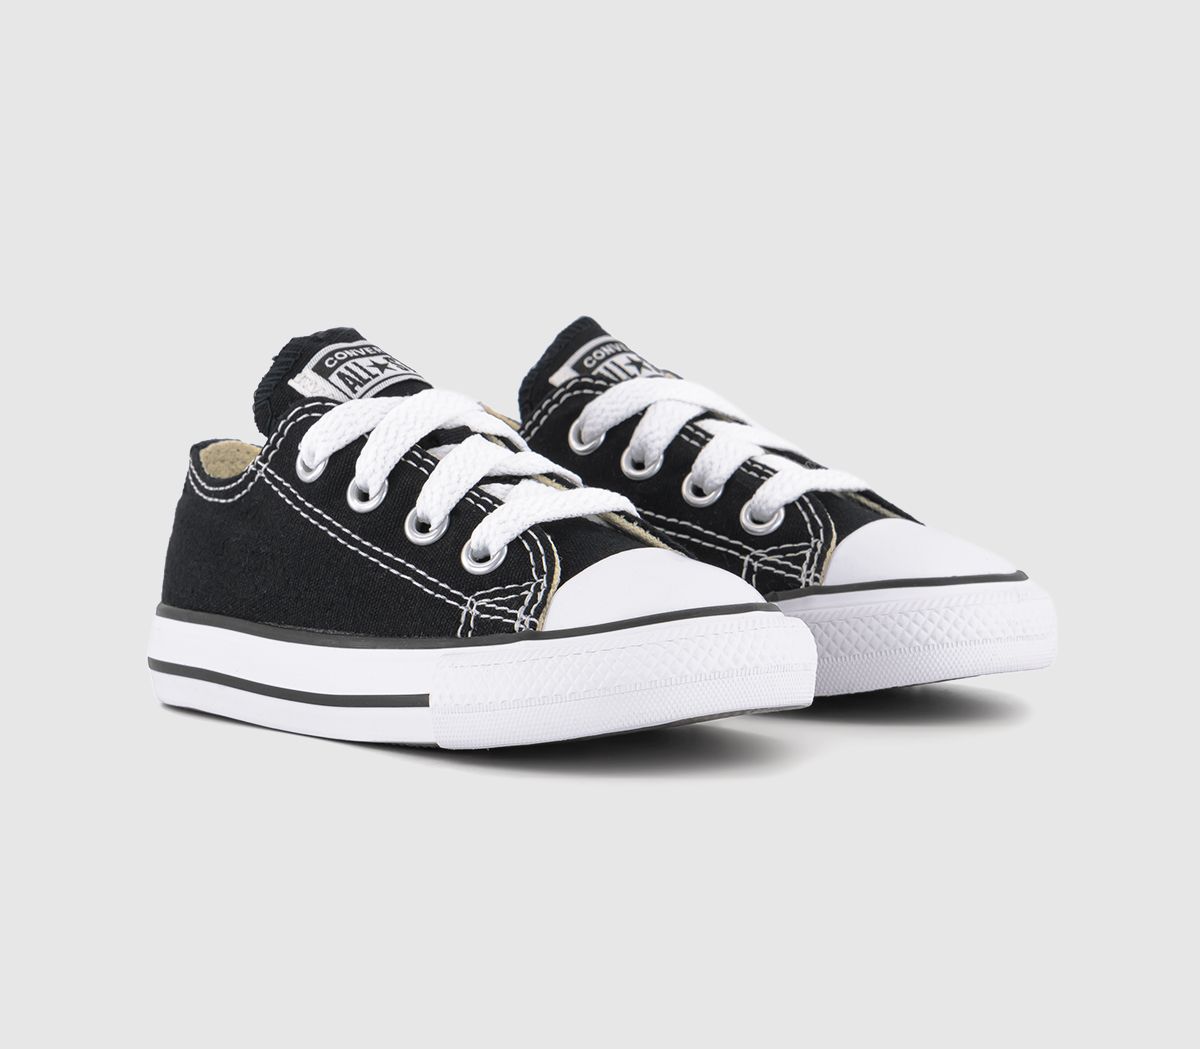 Converse All Star Low Infant Black White - Unisex